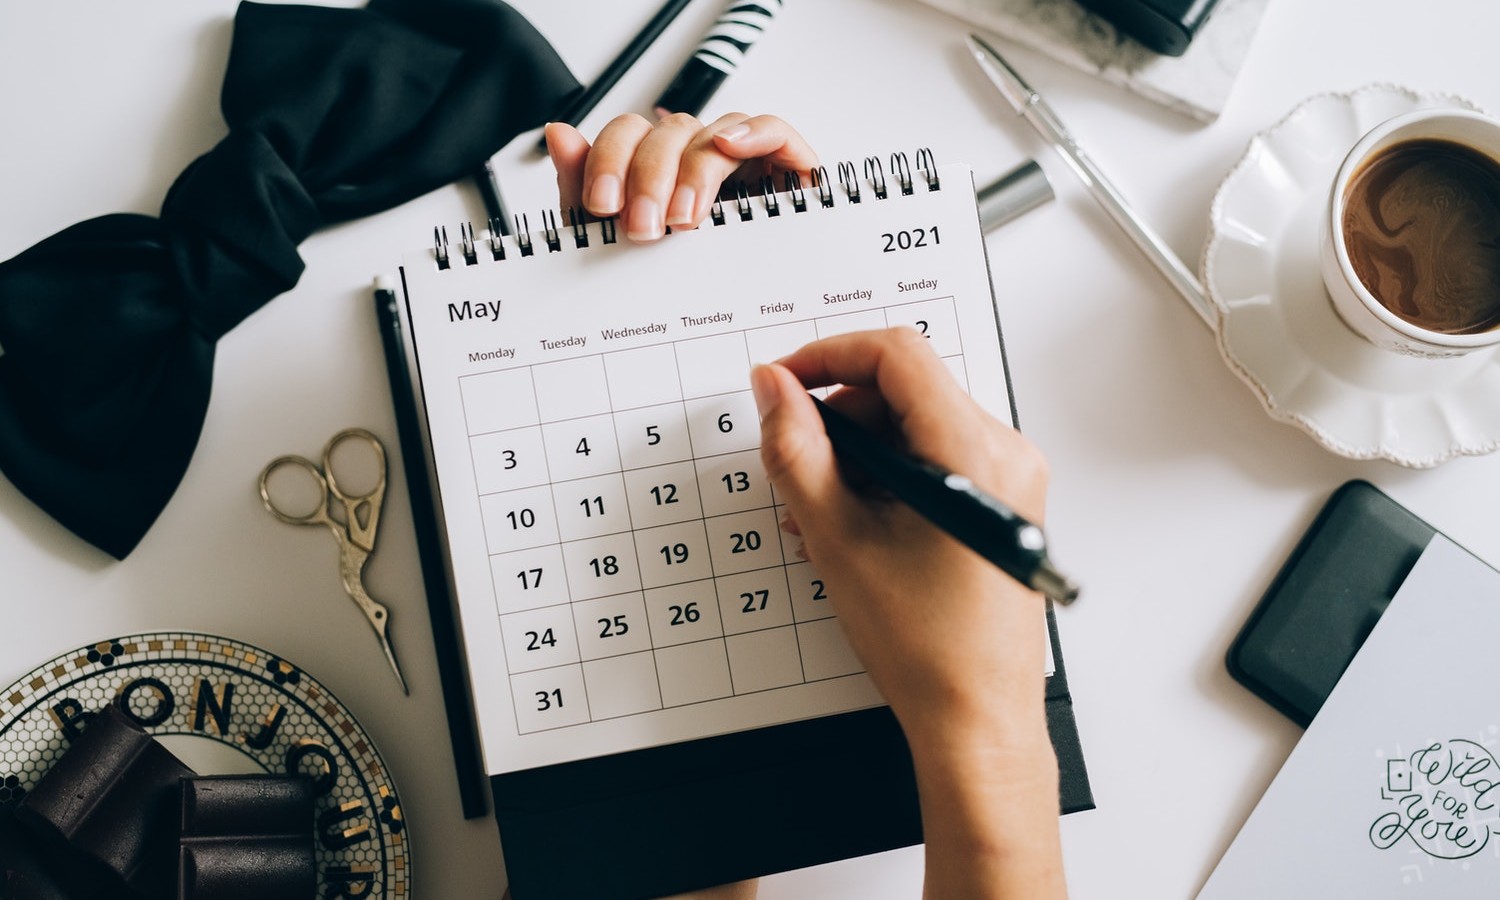 How Keeping a Calendar Can Improve Your Life